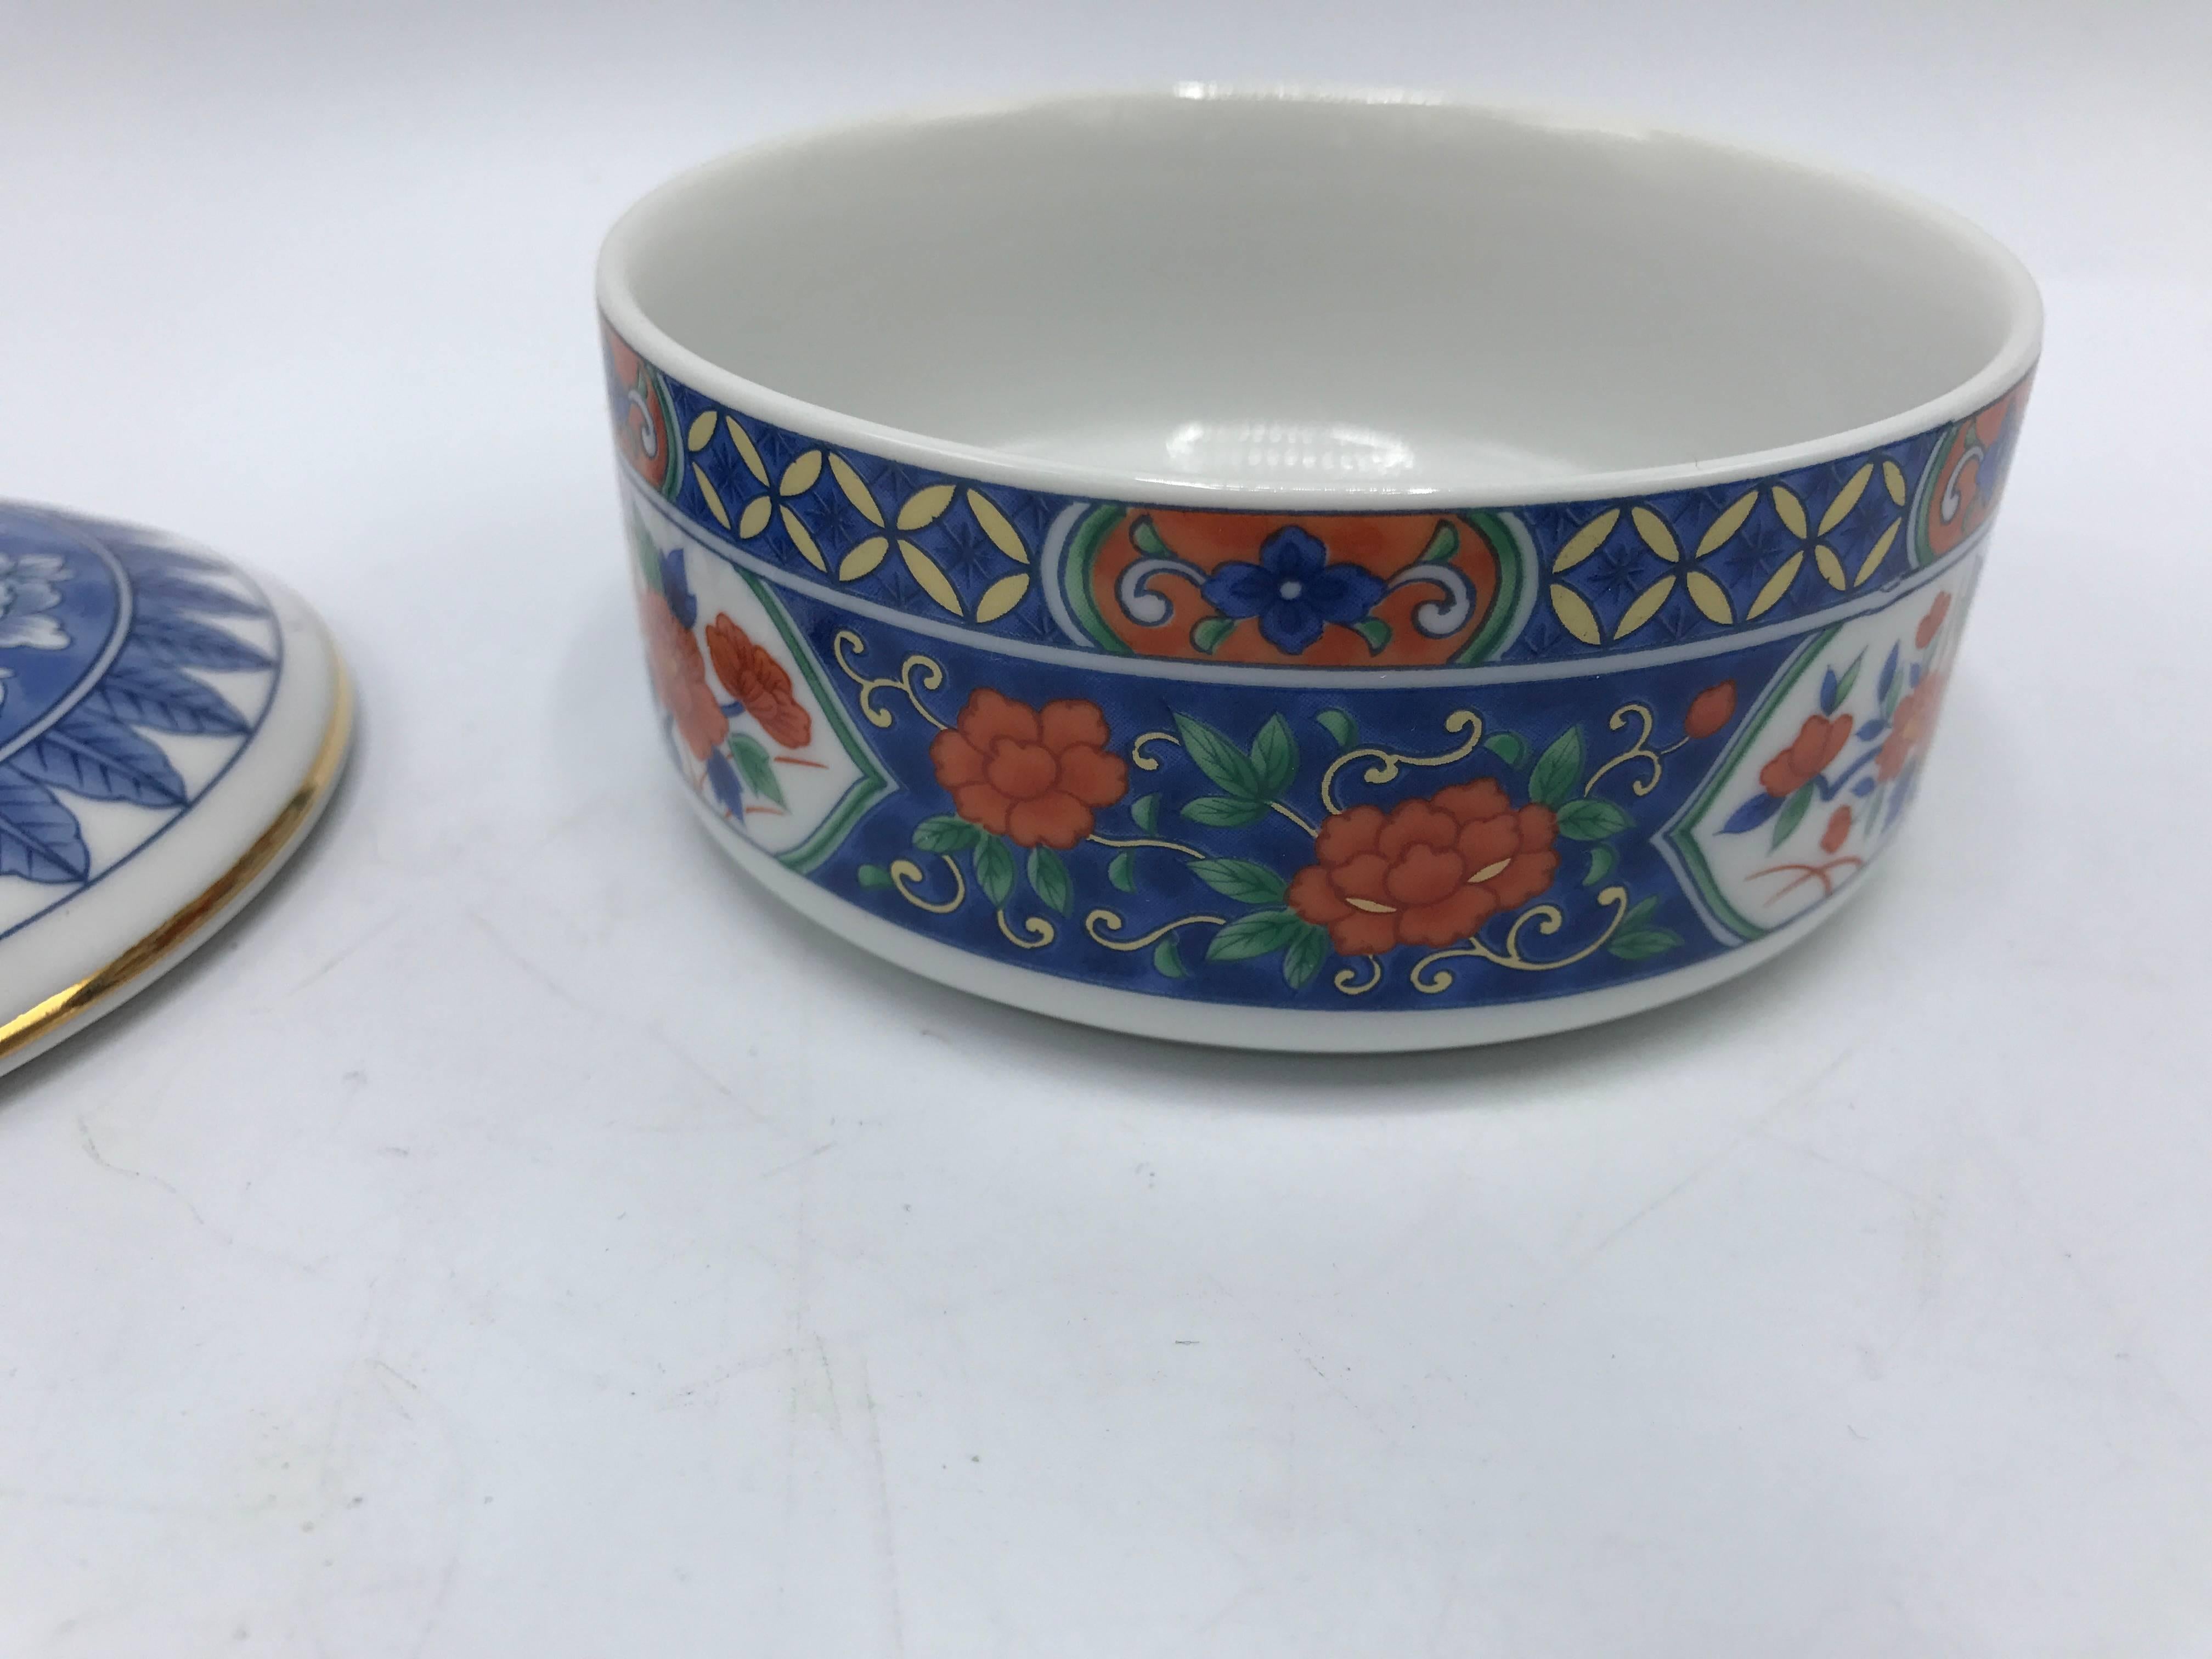 20th Century 1980s Tiffany & Co. Blue and White Chinoiserie Lidded Bowl with Gold Border